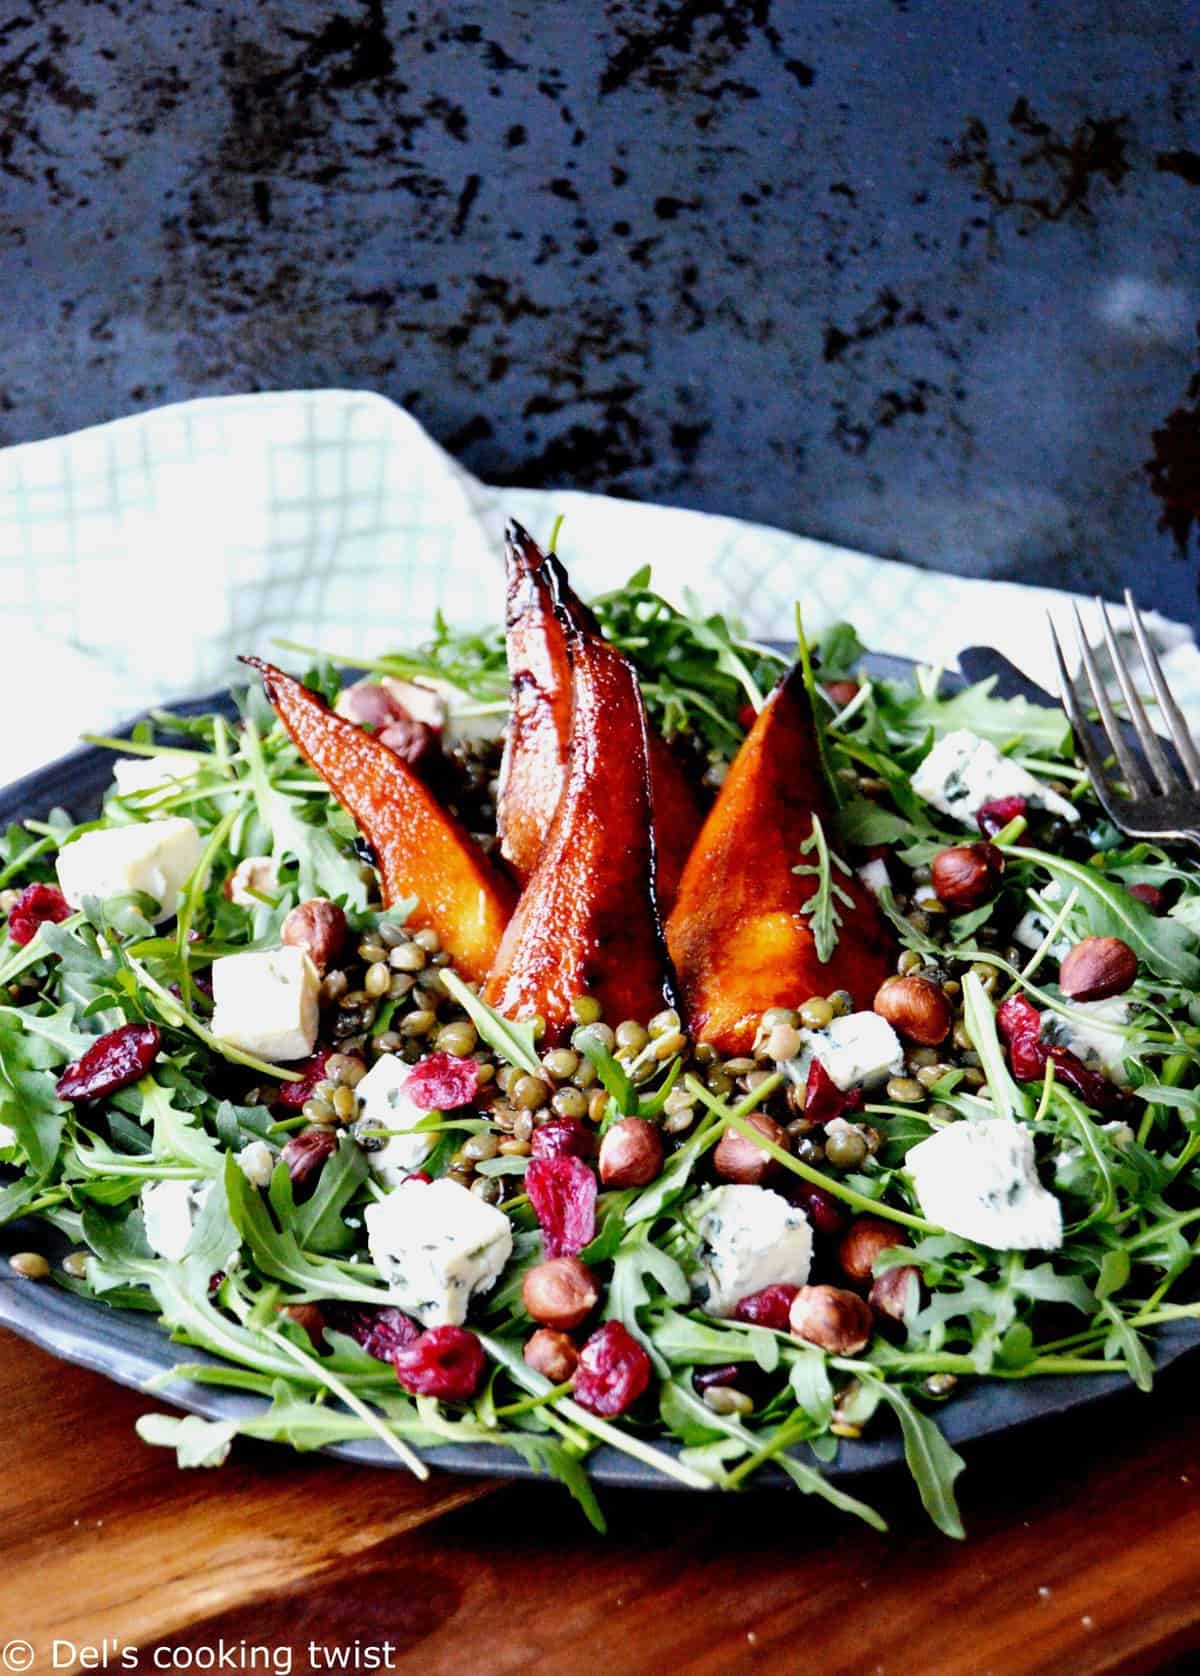 Lentil salad with blue cheese and pears